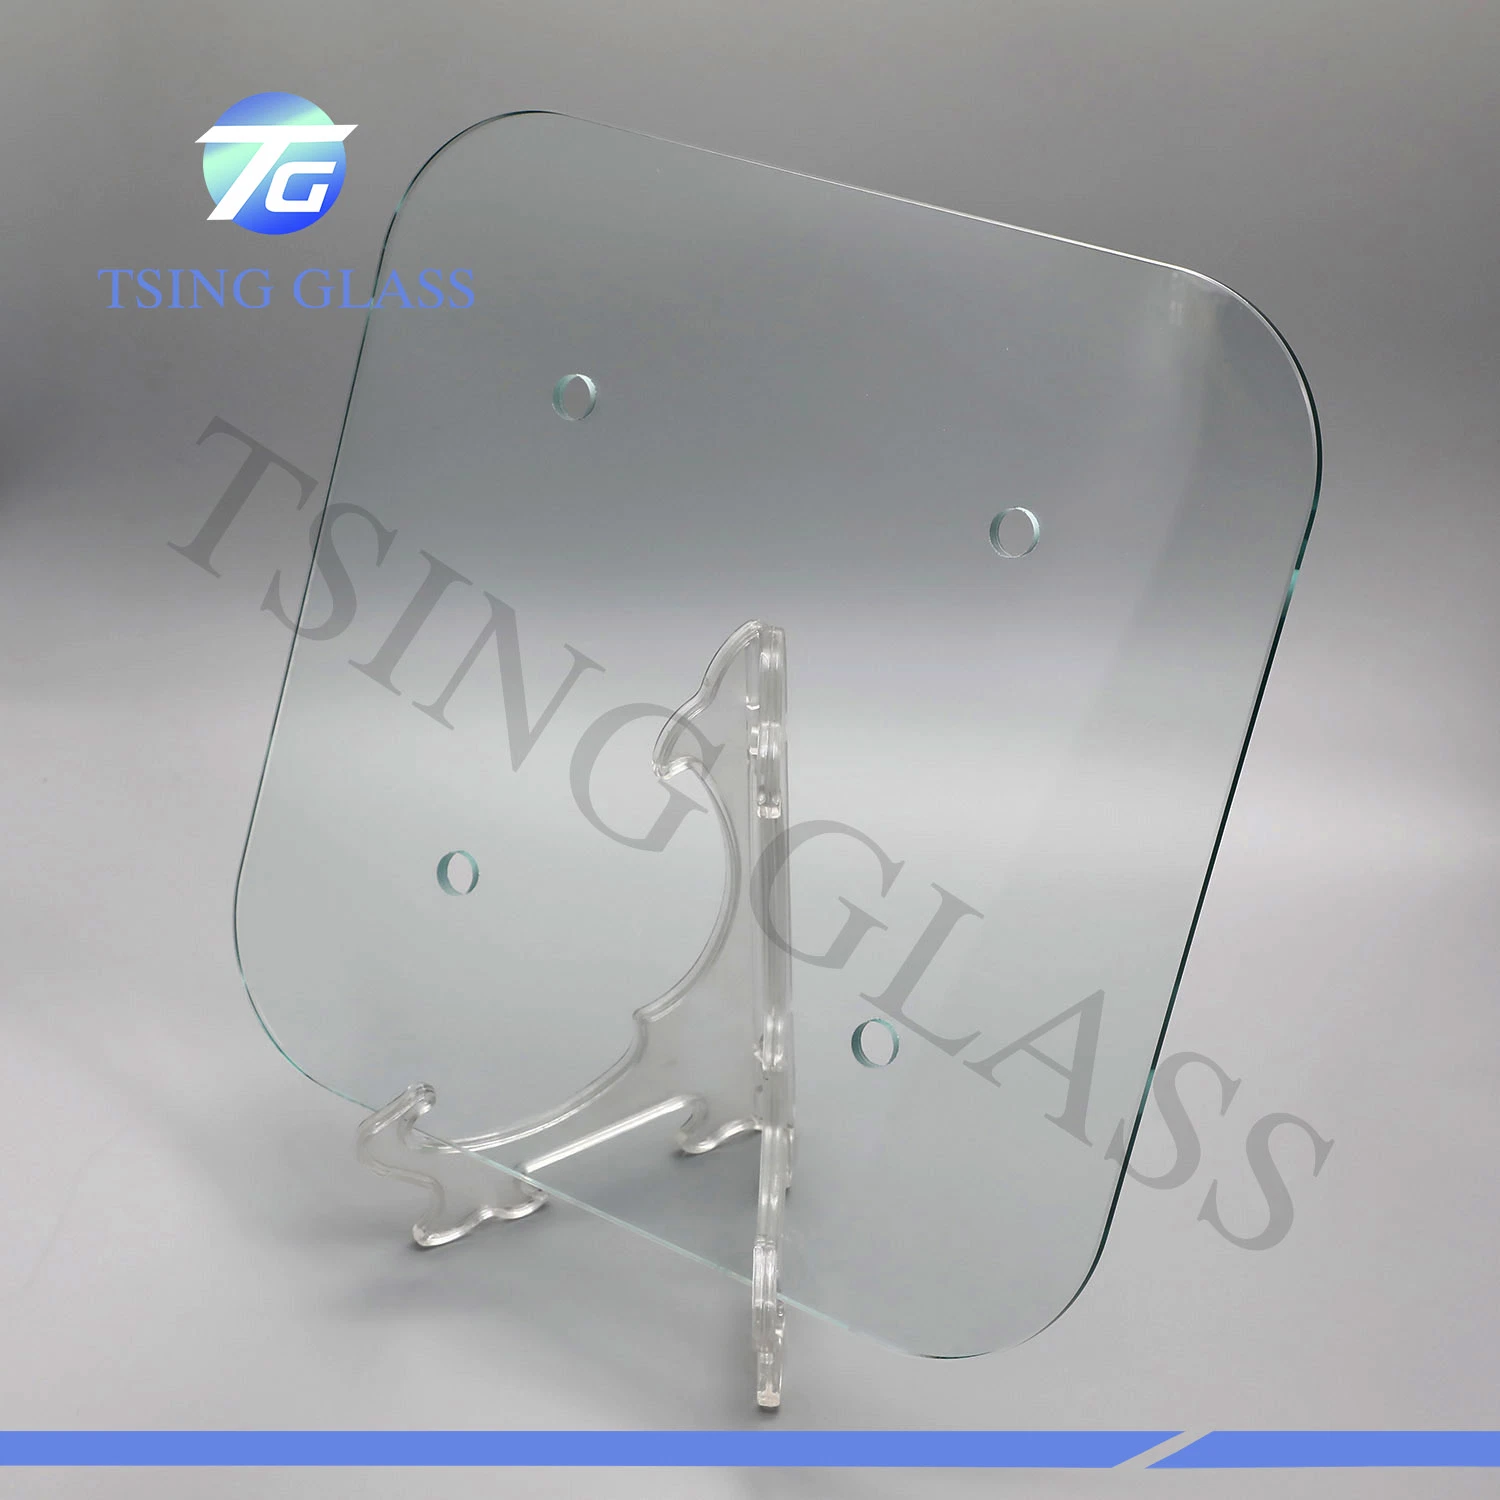 Building Glass/Window Glass/Tempered /Toughened Glass for Shower Room/Bathroom/Railings/Fence/Balustrade